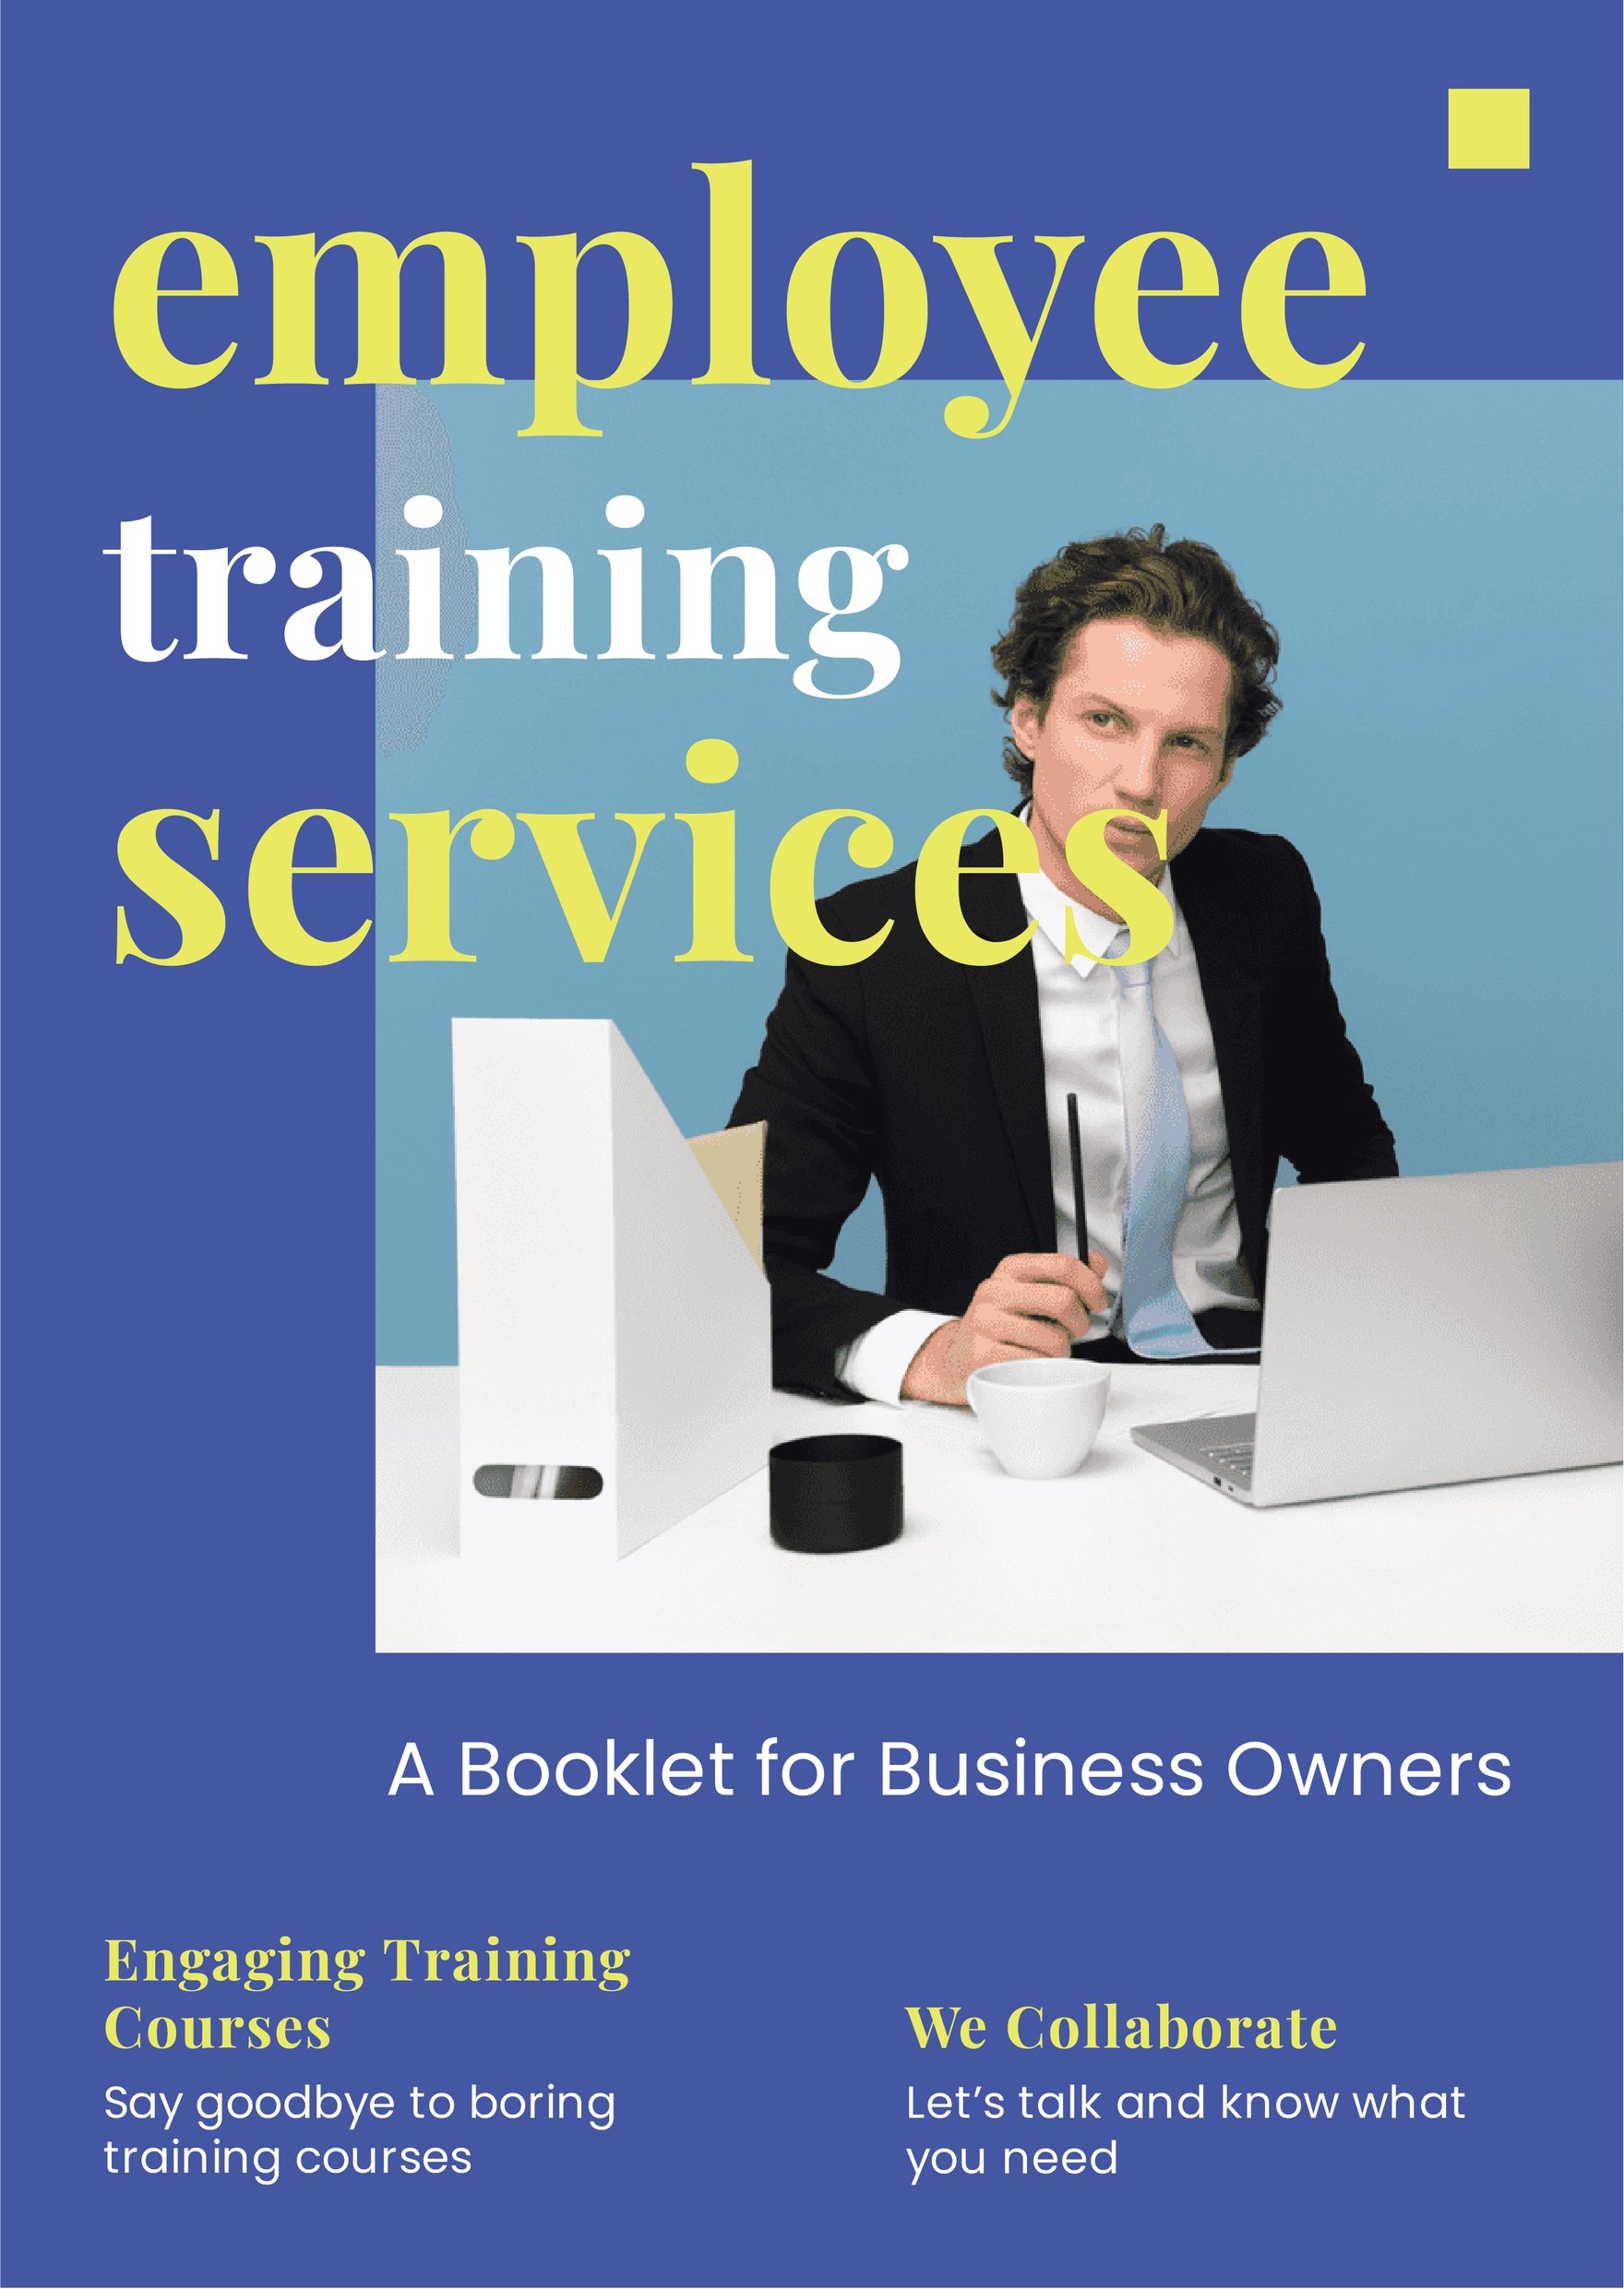 employee-training-booklet-template-download-in-word-google-docs-illustrator-psd-apple